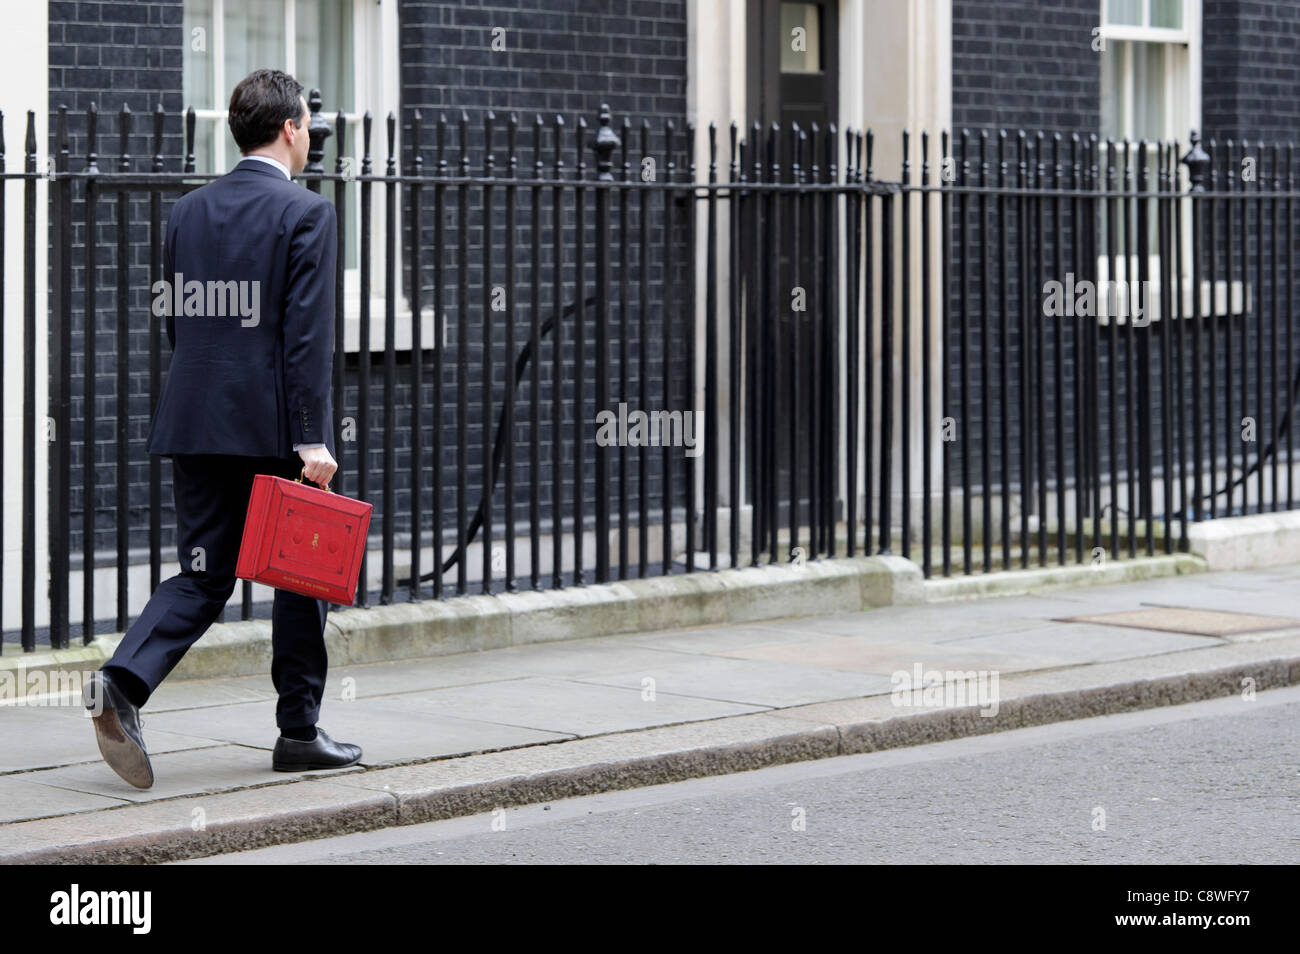 Britain's Chancellor of the Exchequer George Osborne poses for the media with his traditional red dispatch box. Stock Photo